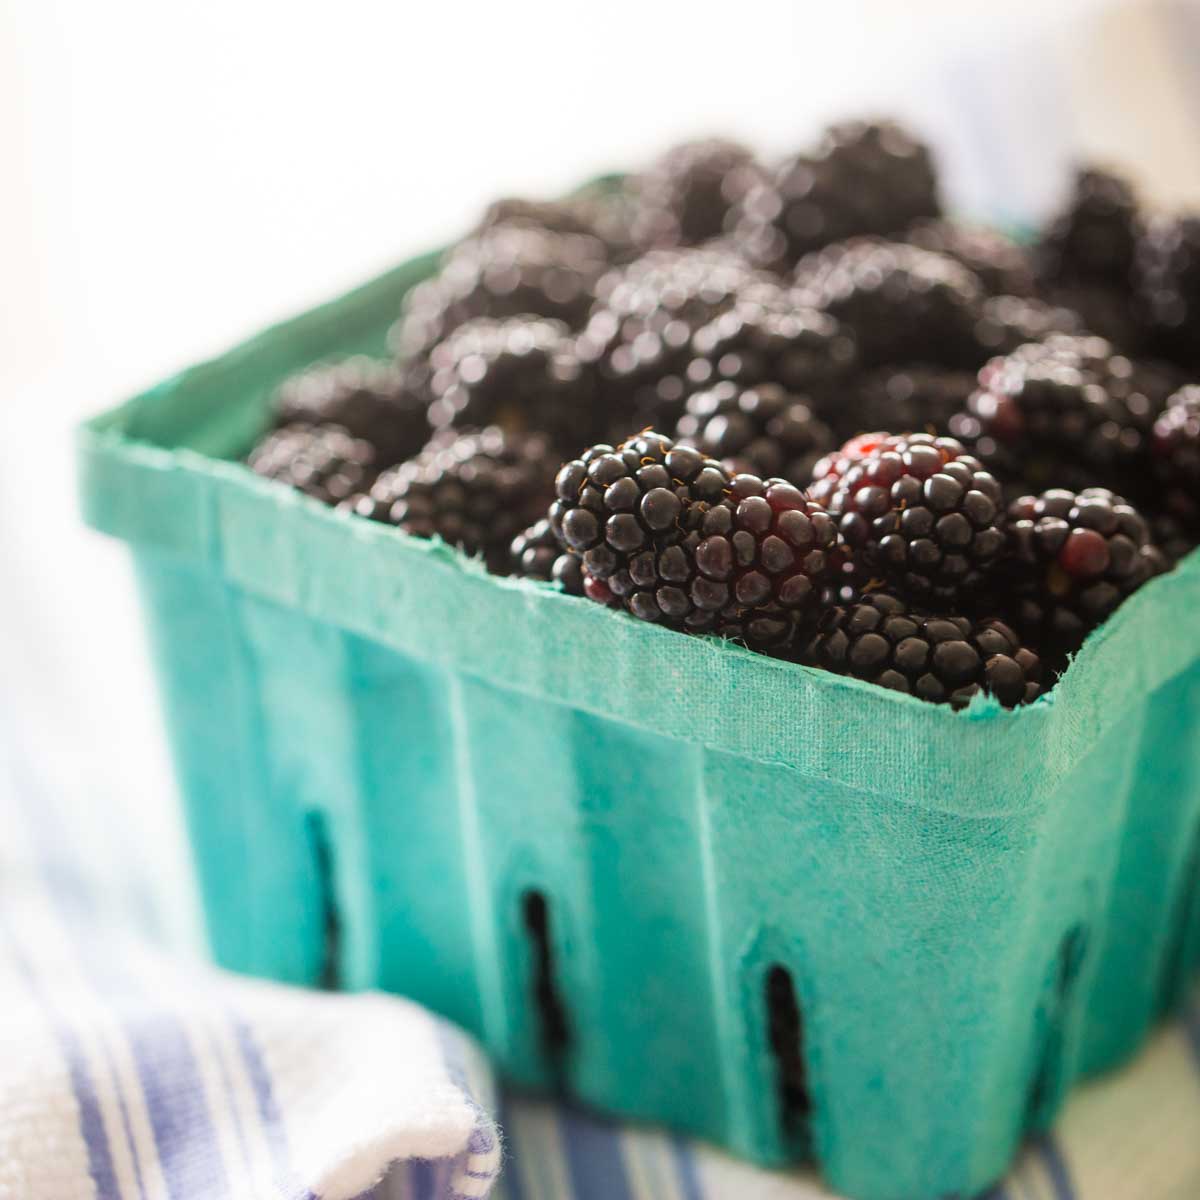 A blue farmer's market container is filled with fresh blackberries.